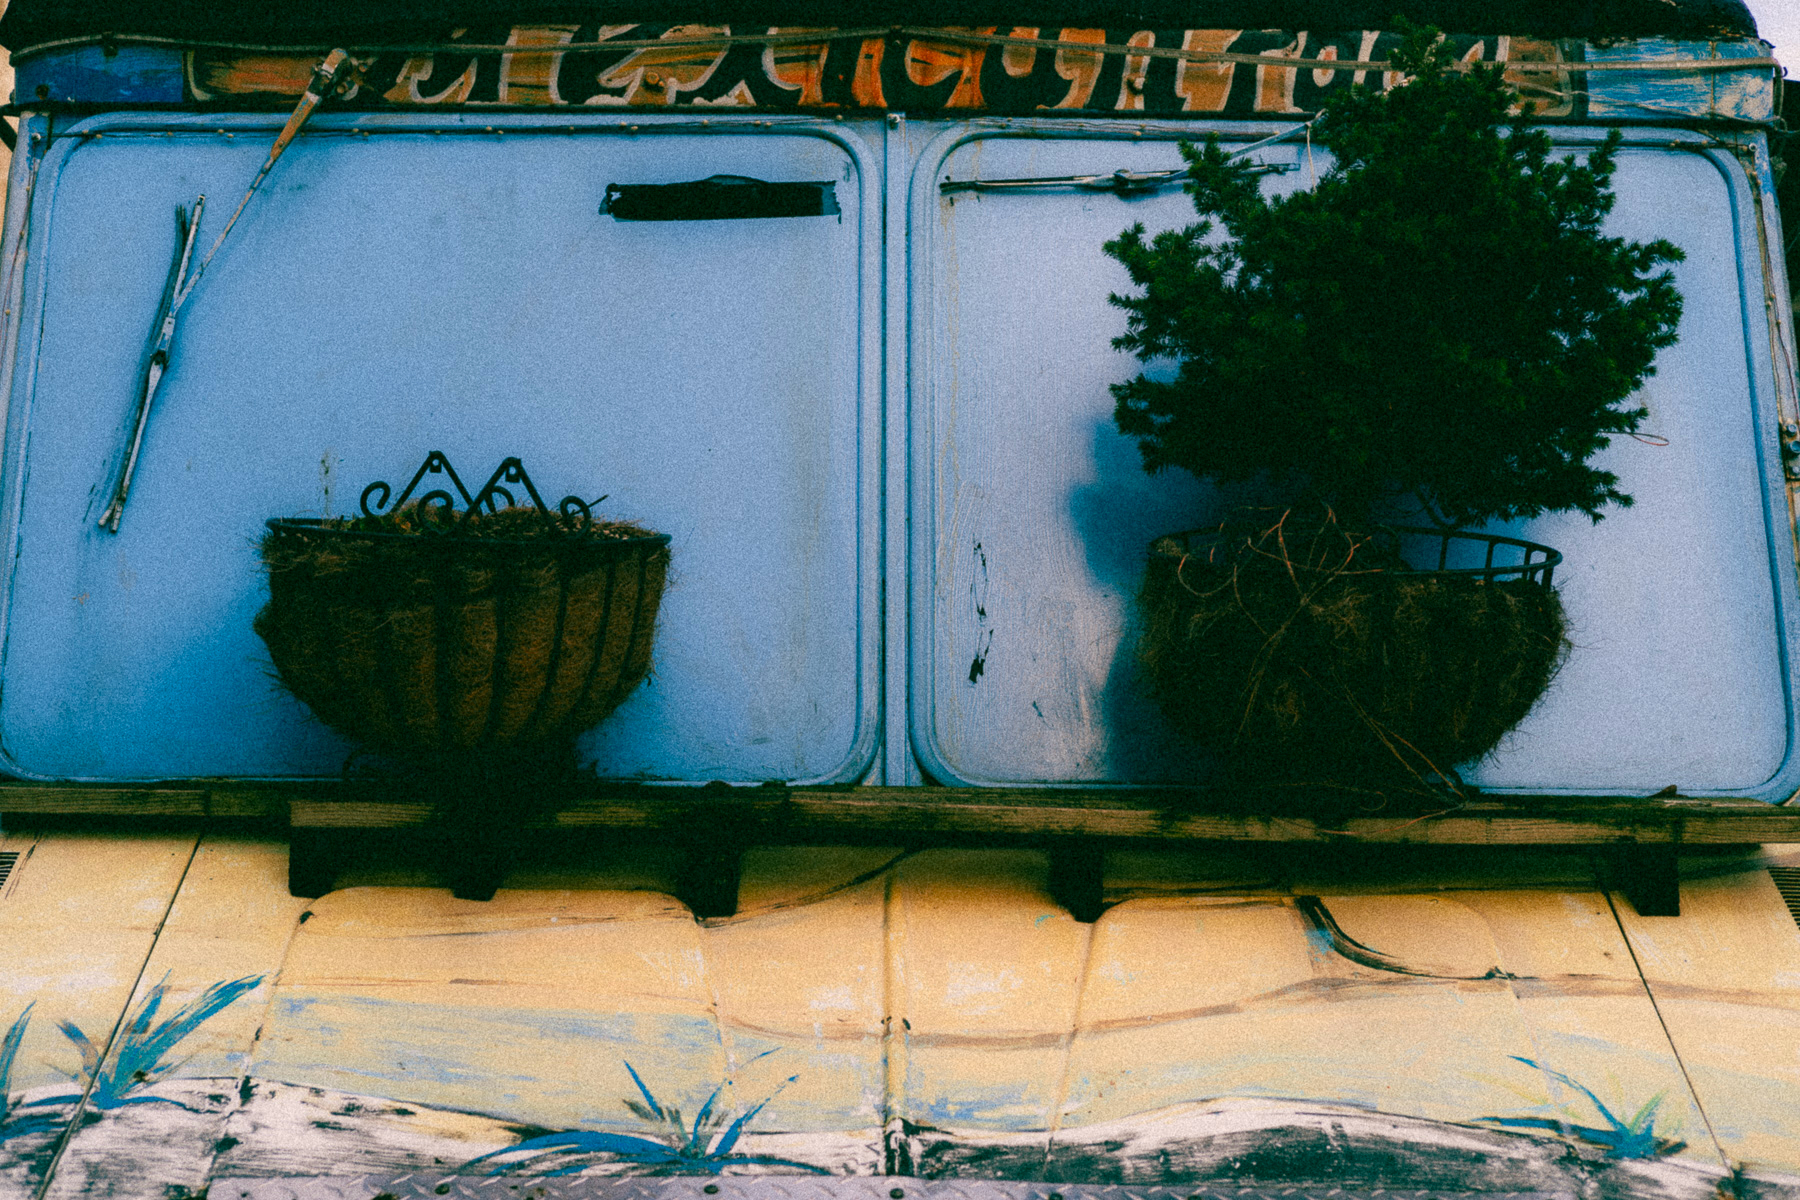 Two potted plants placed on a makeshift windshield ledge of a truck with faded blue paint on the glass, and yellow lower section, with a sign above that reads, “Mexican food”.